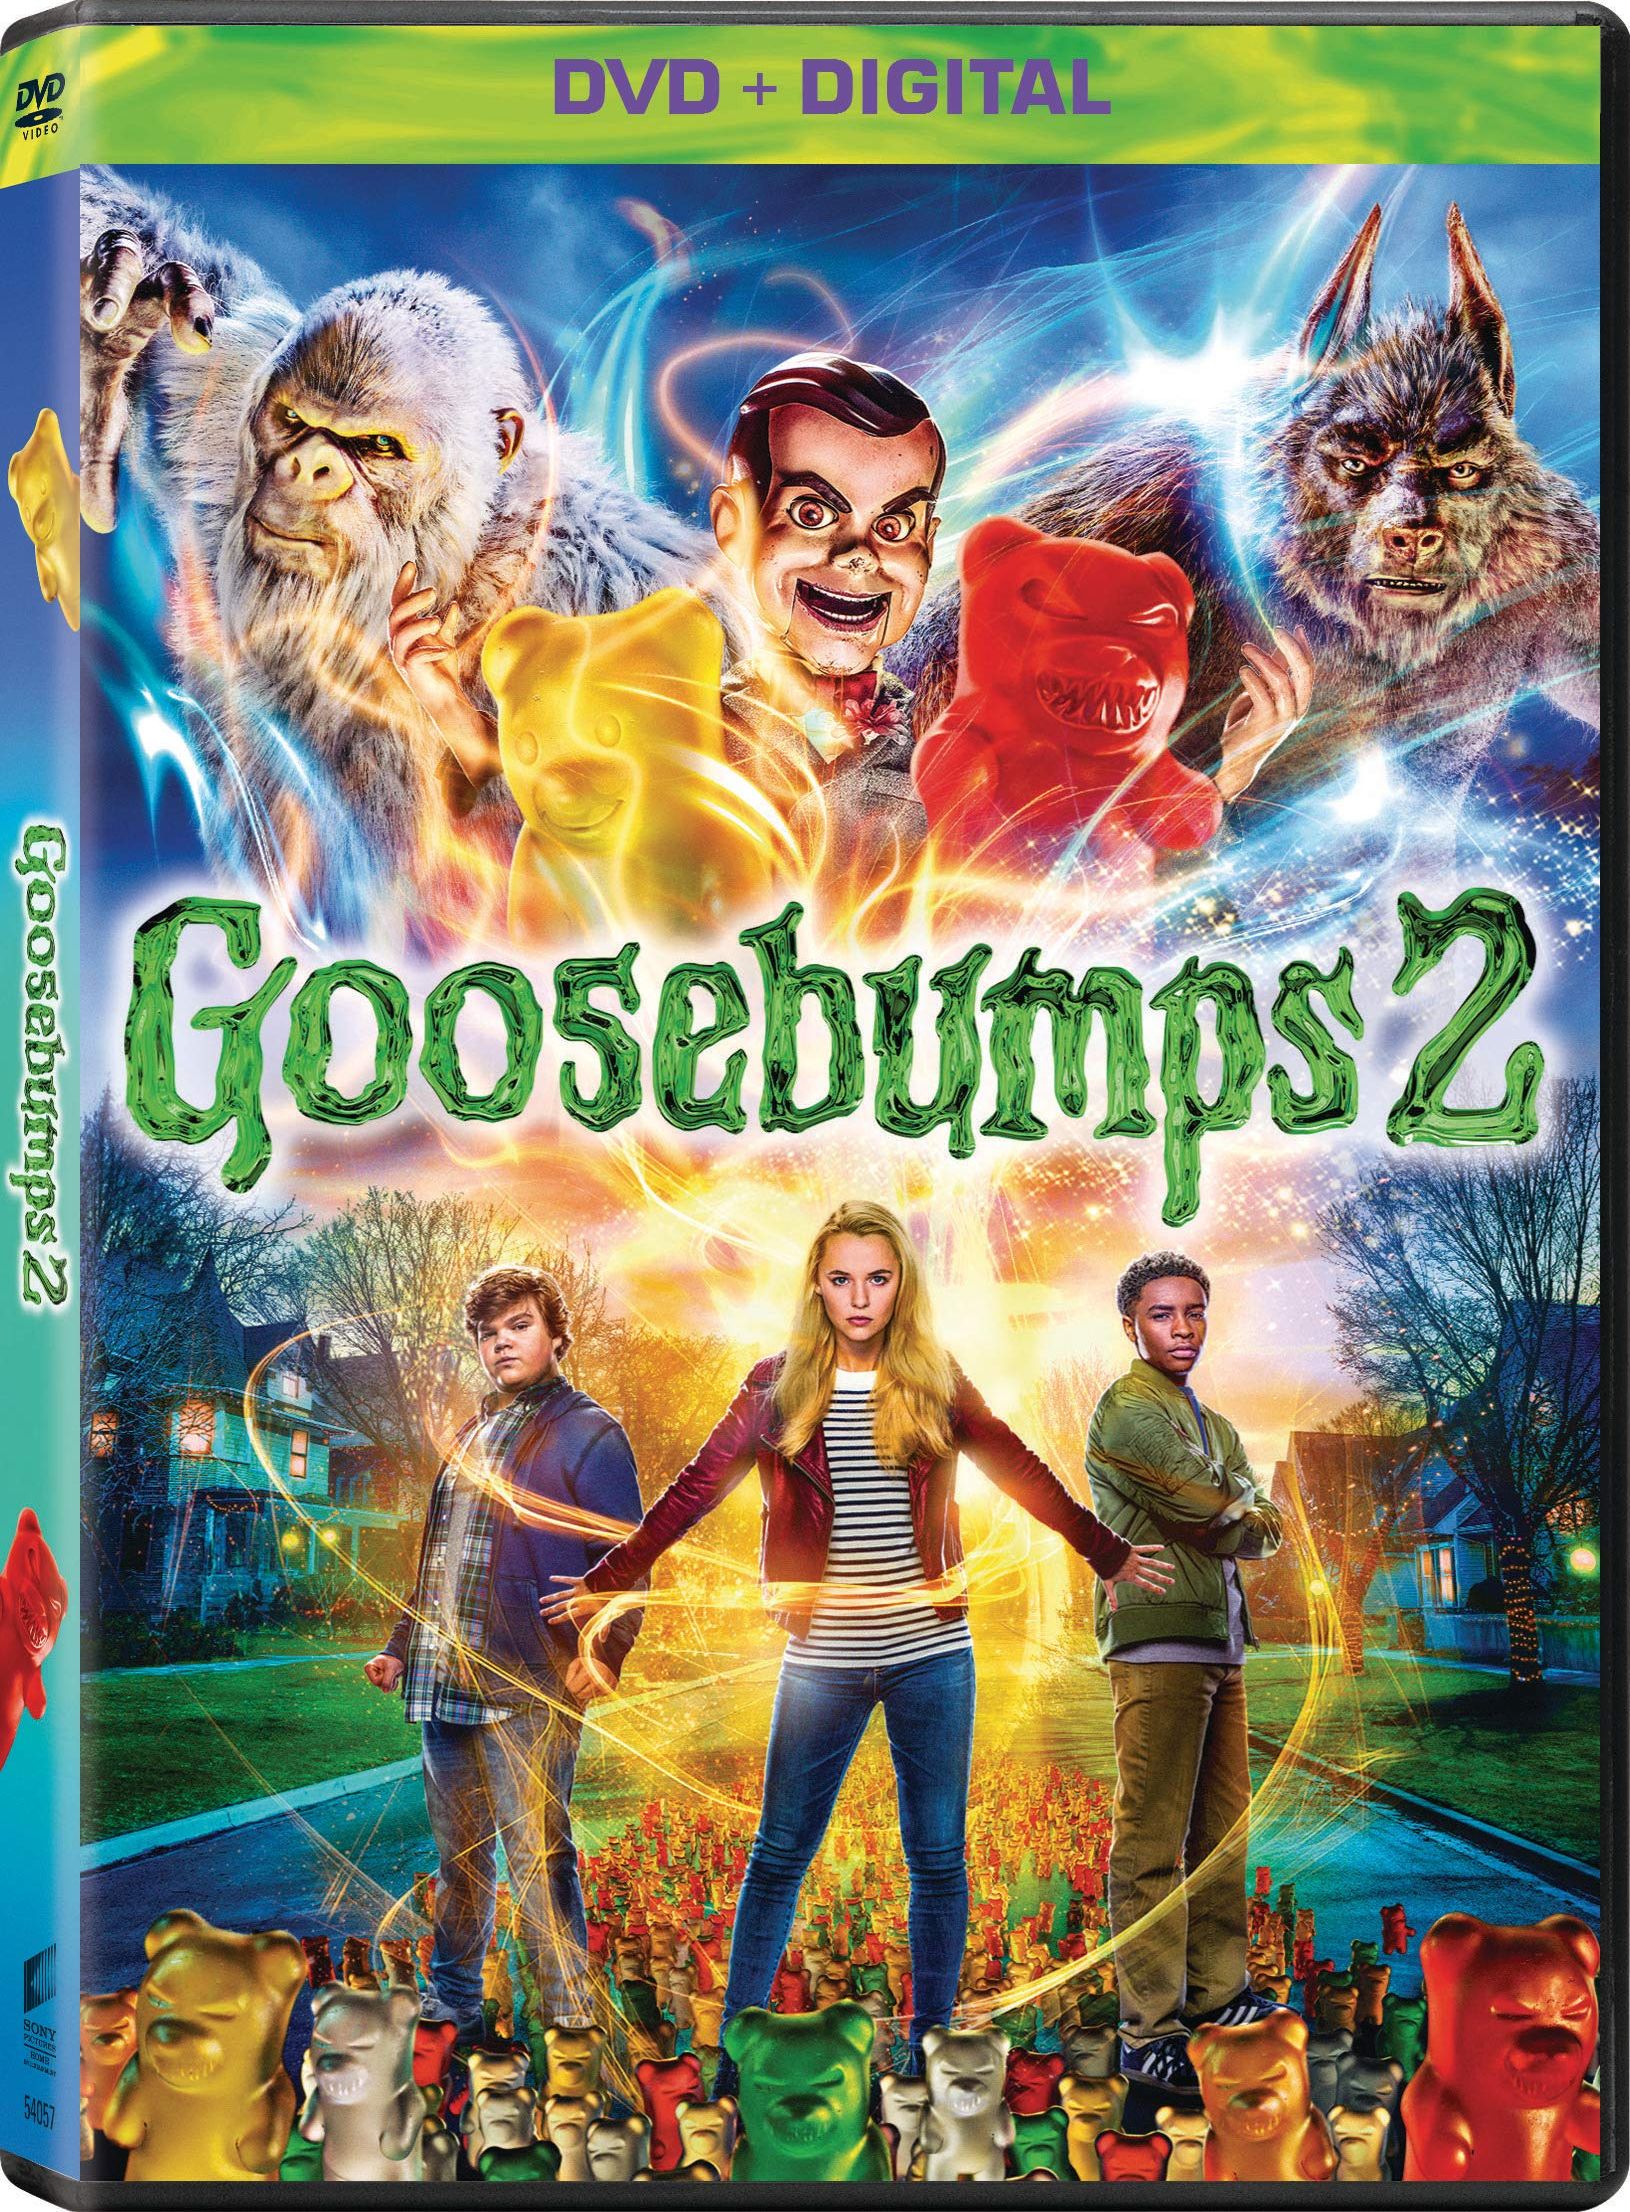 when does the halloween sequel 2020 come out on dvd Goosebumps 2 Haunted Halloween Dvd Release Date January 15 2019 when does the halloween sequel 2020 come out on dvd